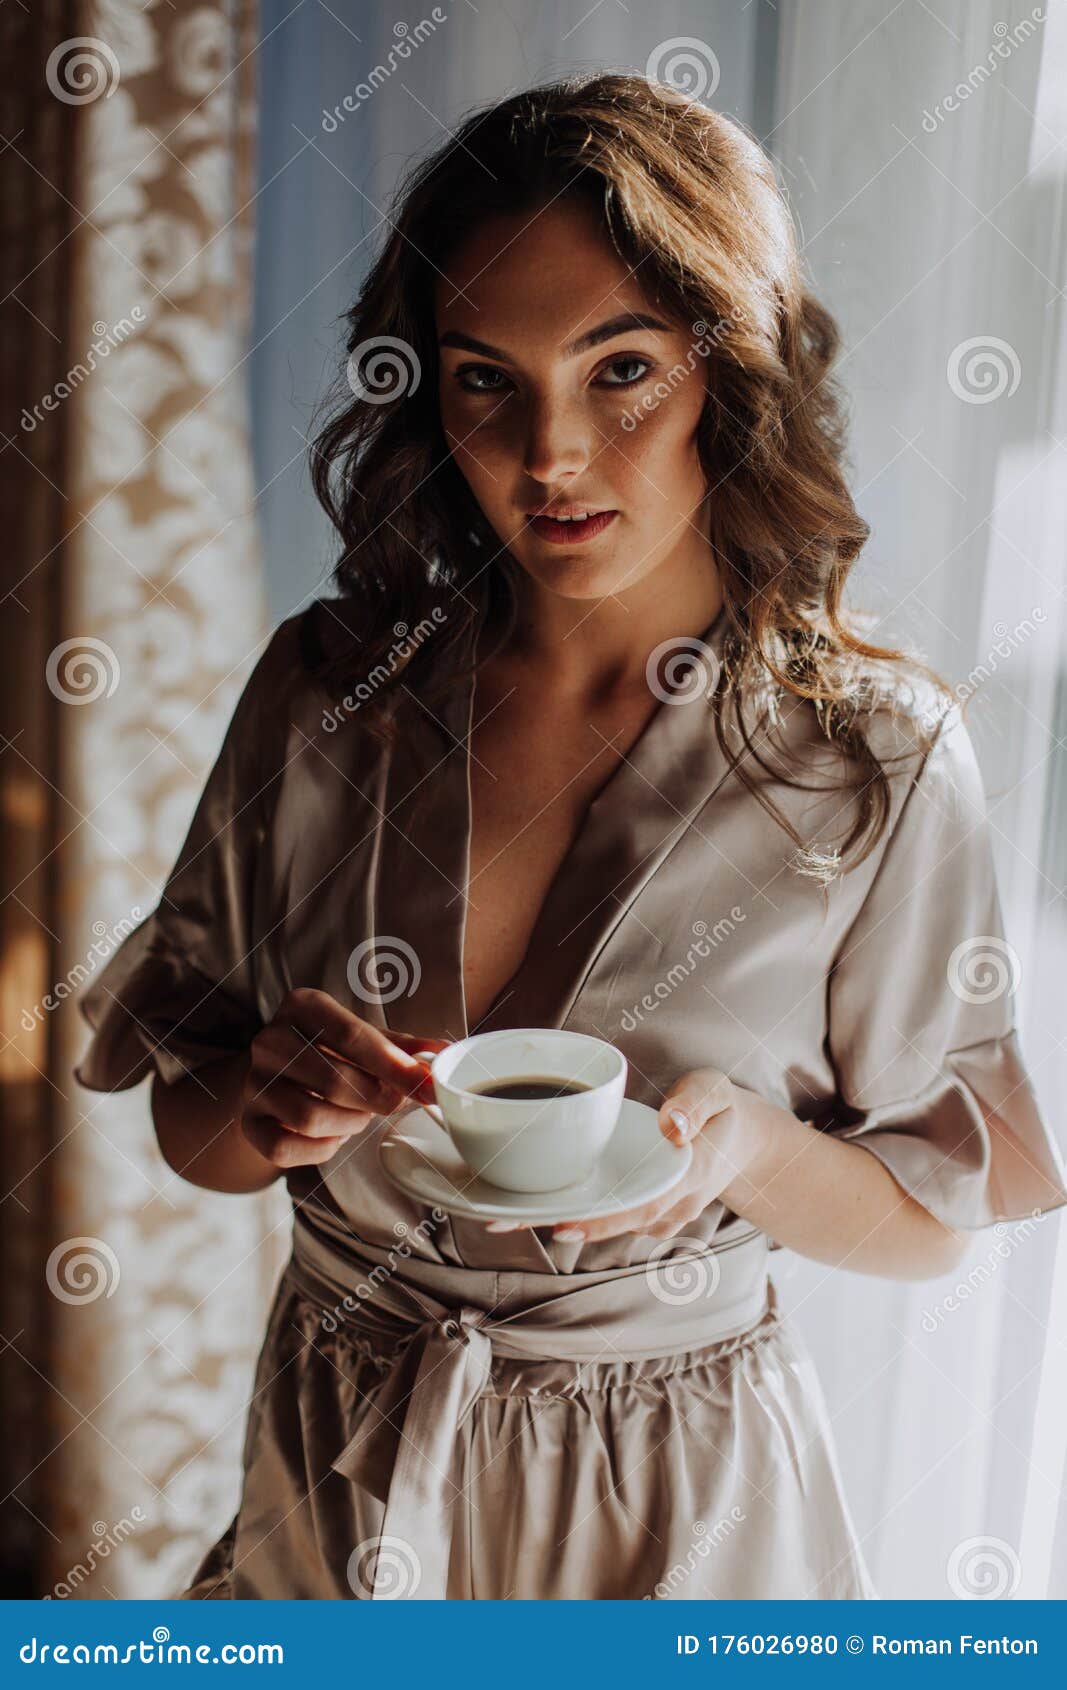 Wake up your gf with sexy tea & morning sex